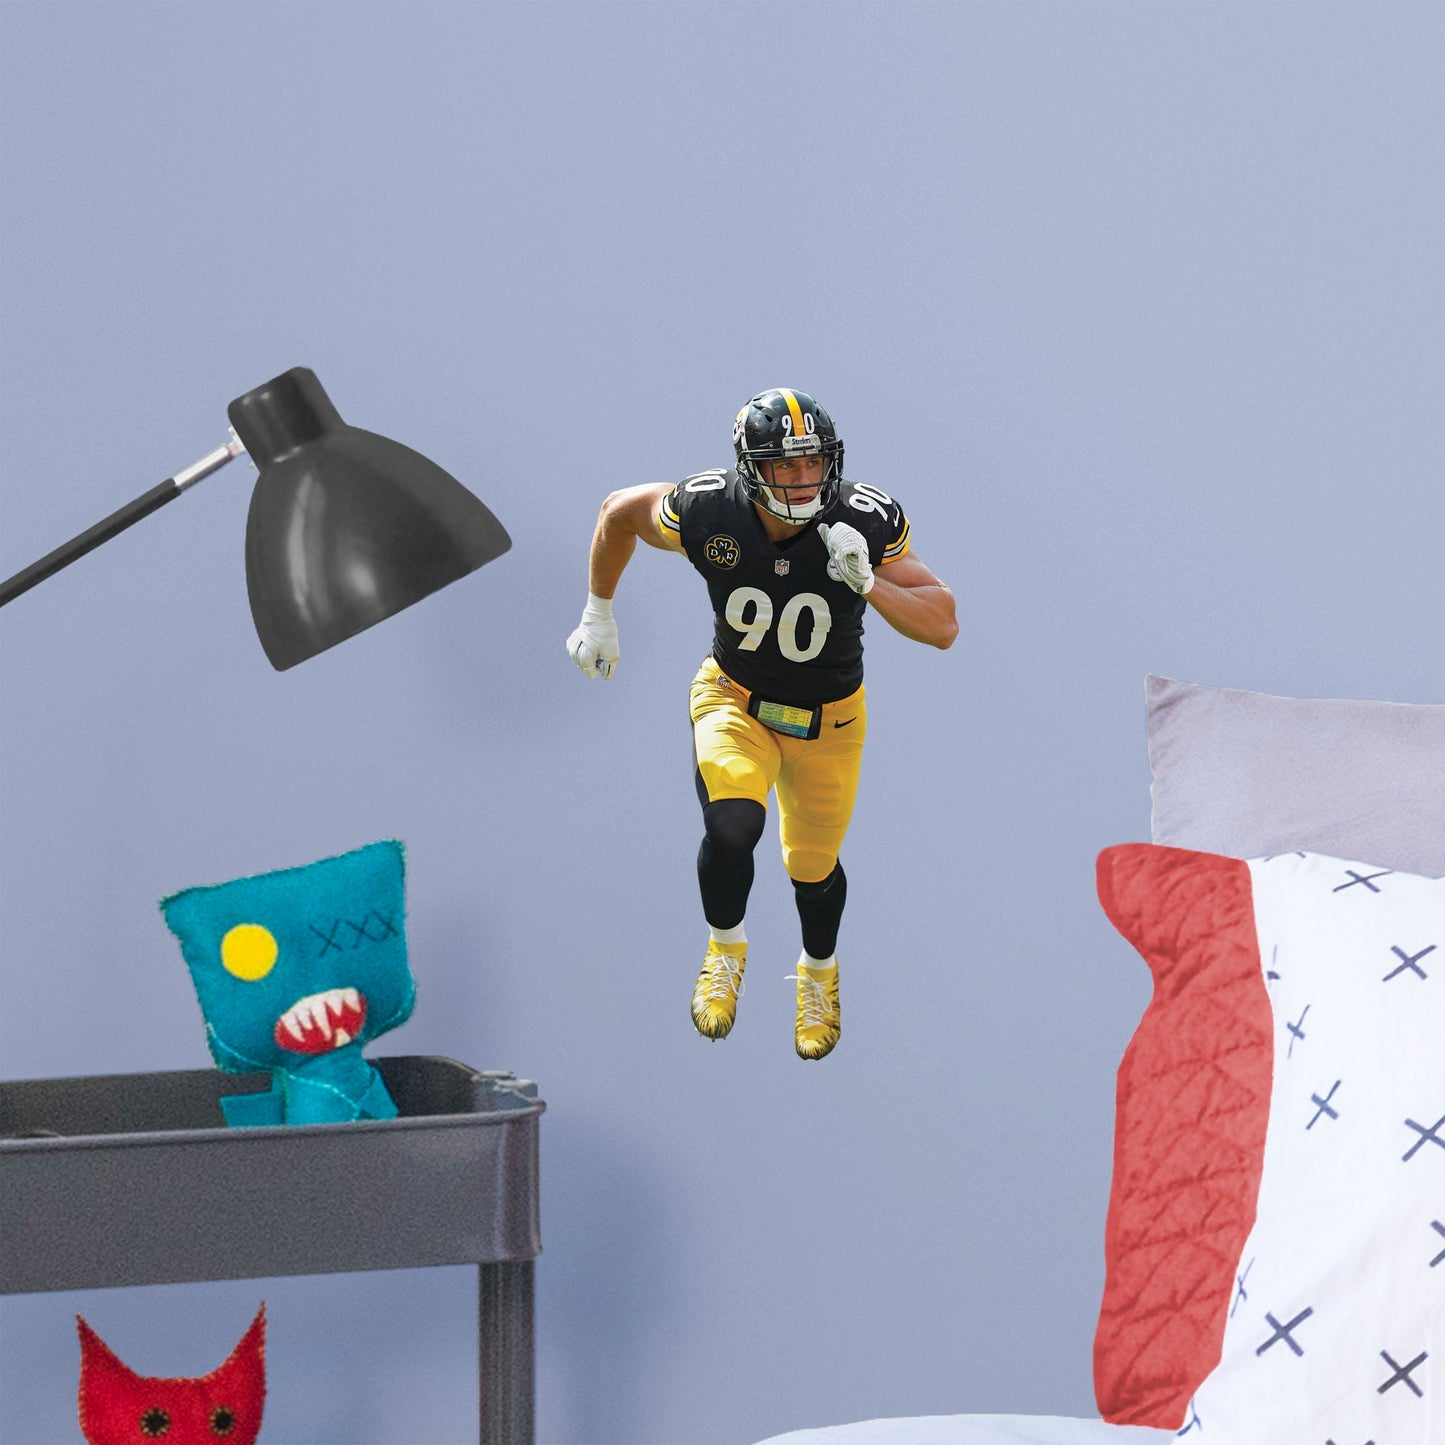 Pittsburgh Steelers: T.J. Watt Running        - Officially Licensed NFL Removable Wall   Adhesive Decal